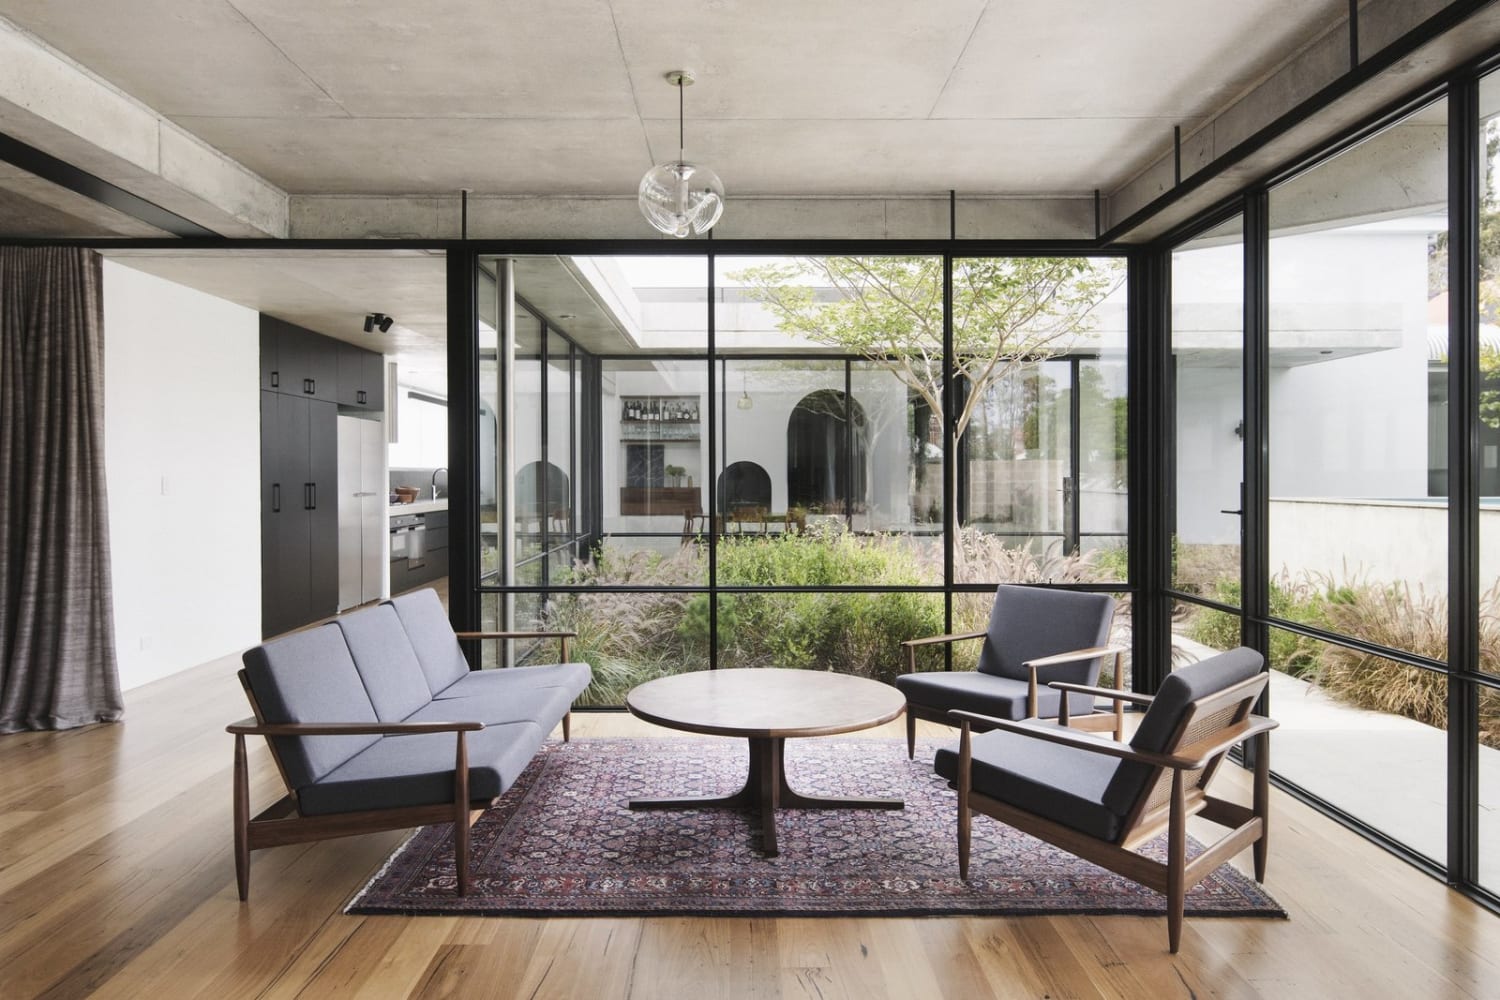 Two Sisters Work Together to Revive and Expand a Turn-of-the-Century Home in Perth